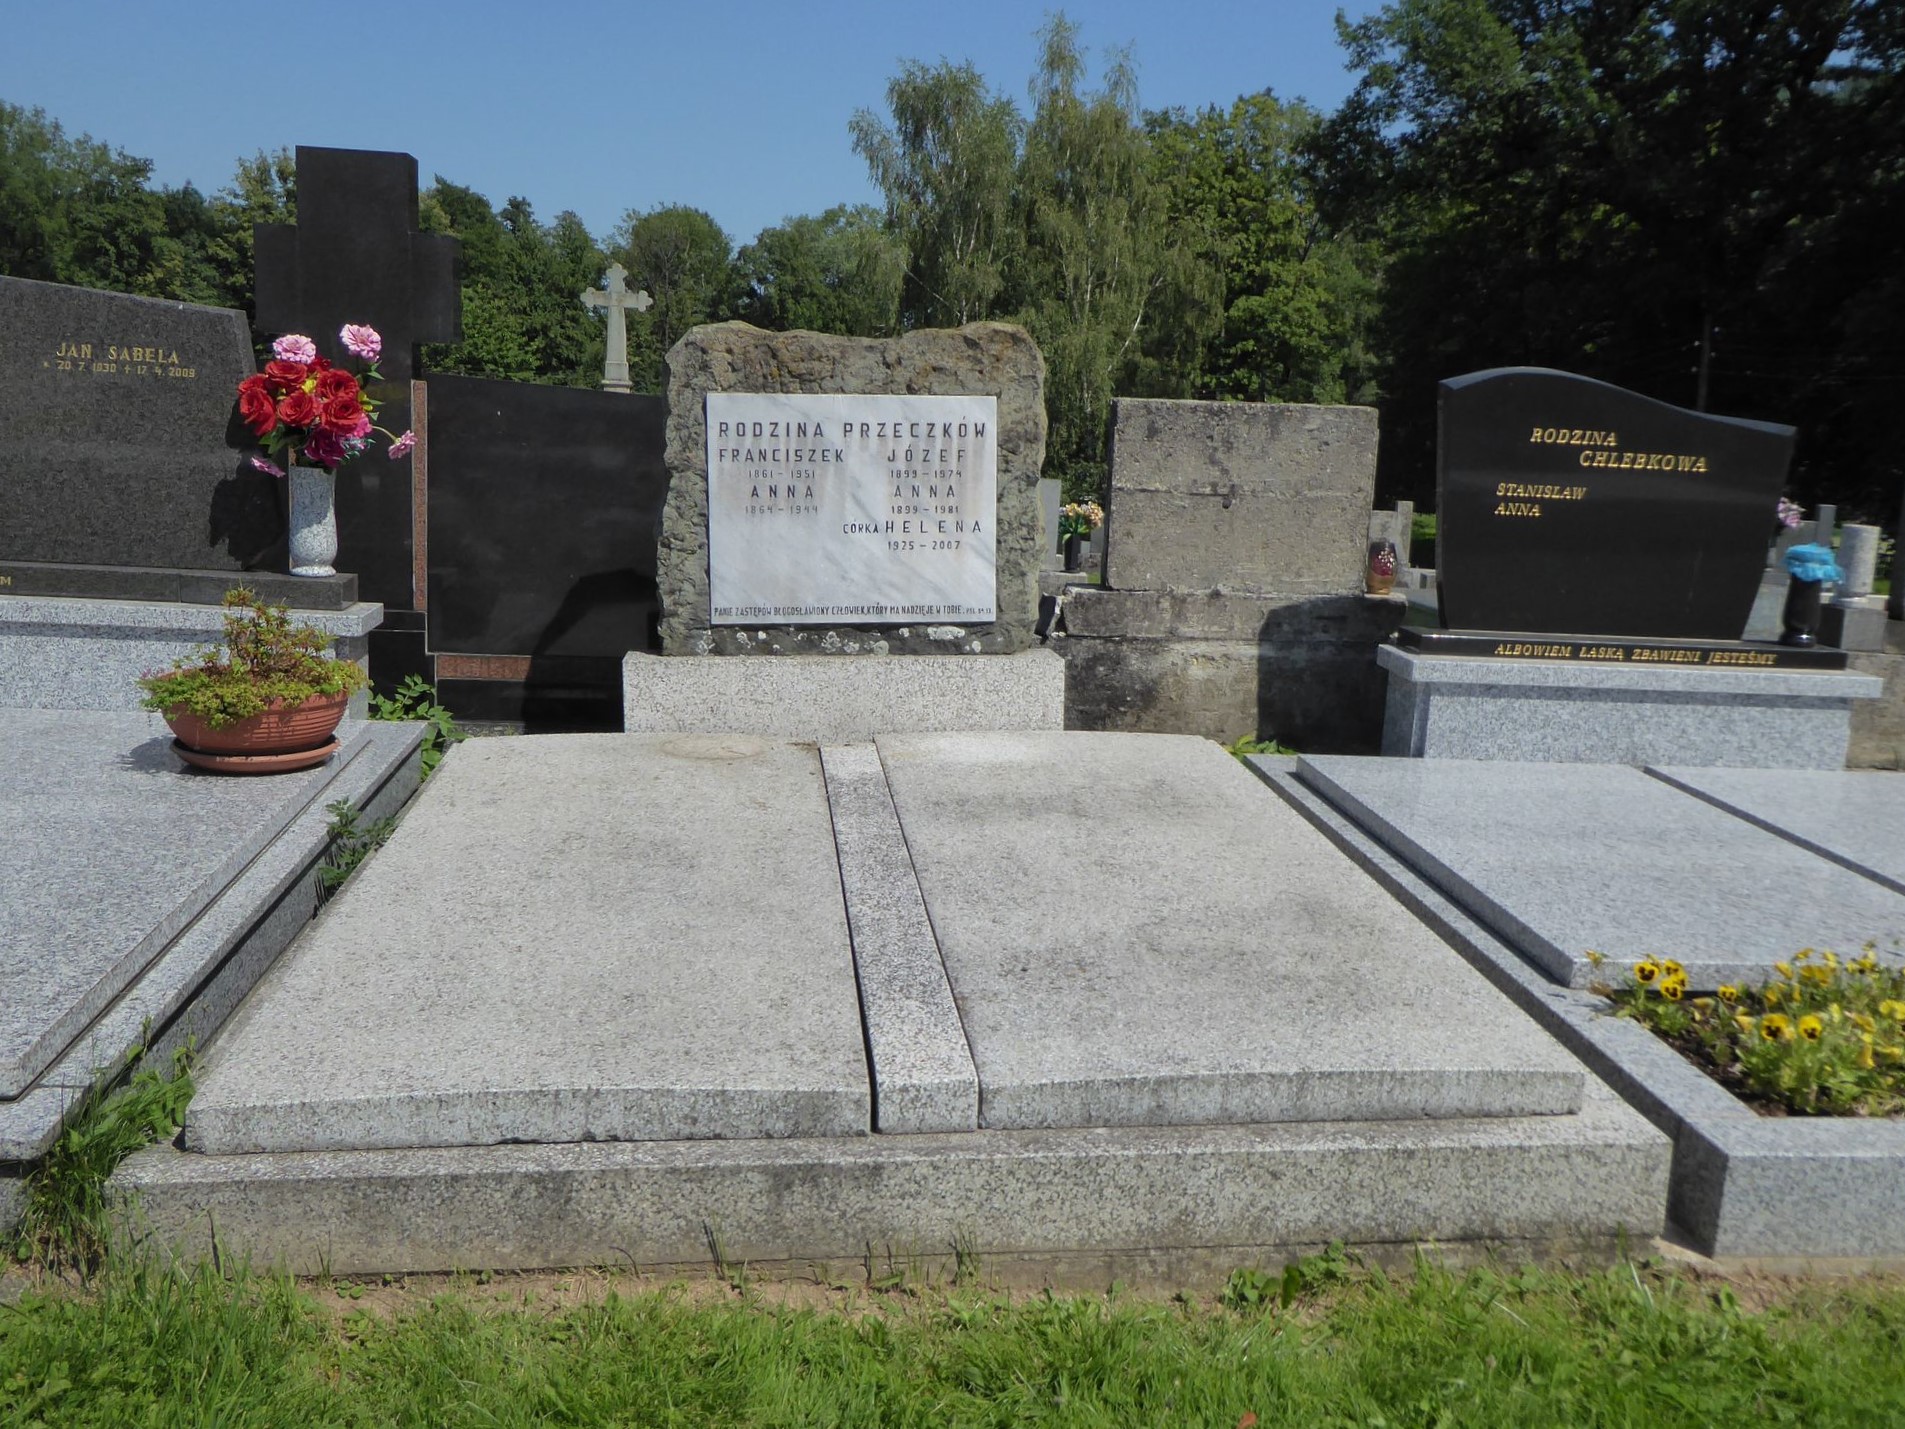 Tomb of the Przeczek family from the cemetery of the Czech part of Těšín Silesia, as of 2022.